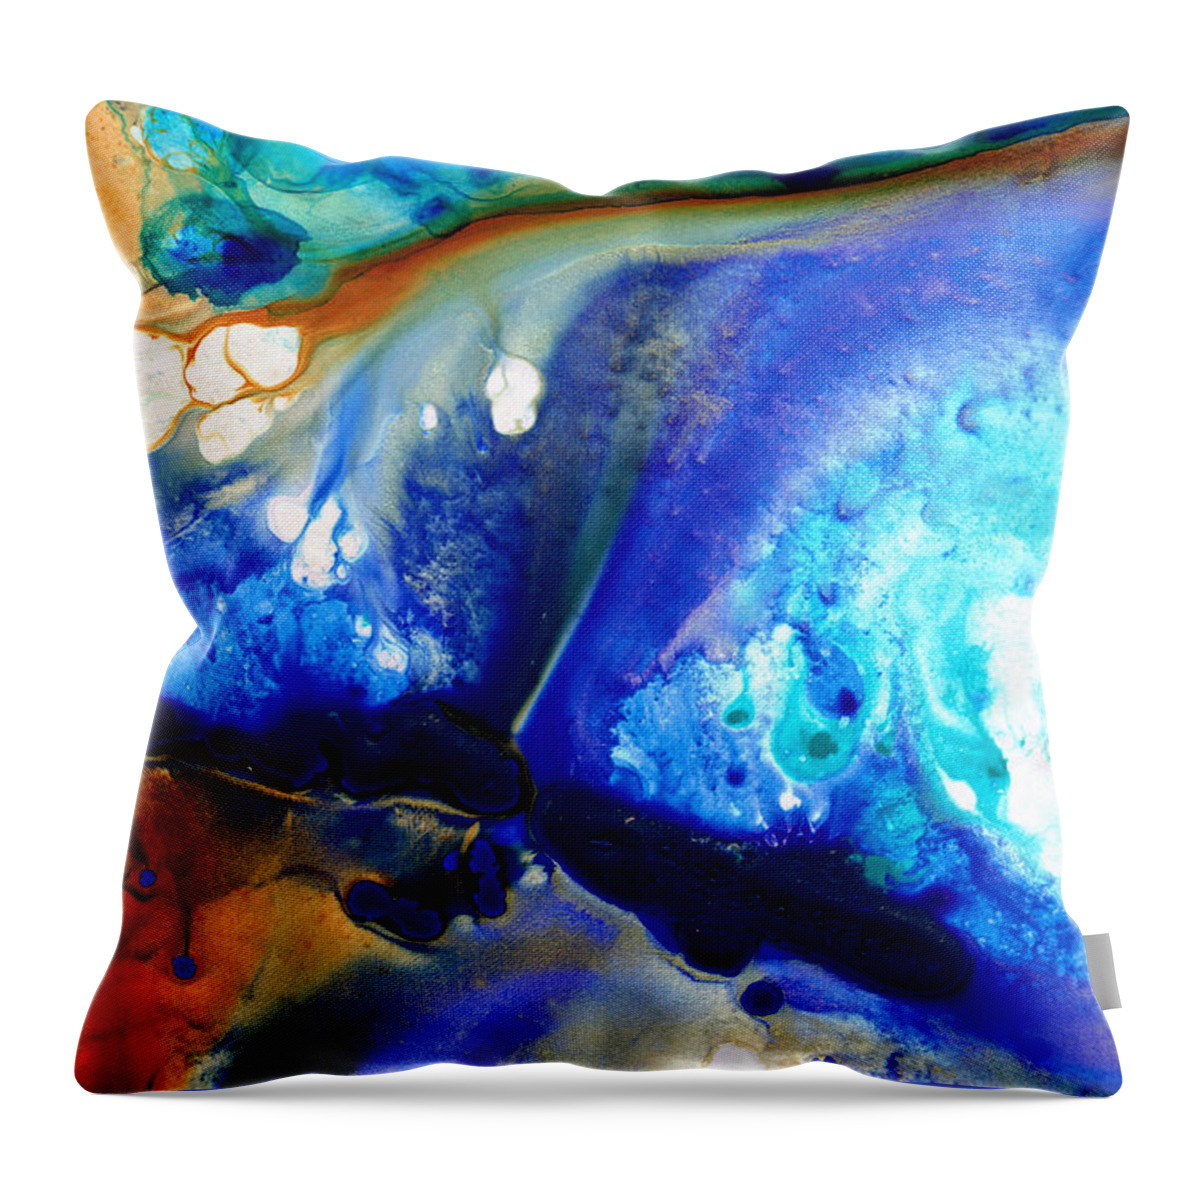 Blue Throw Pillow featuring the painting Heaven and Earth by Sharon Cummings